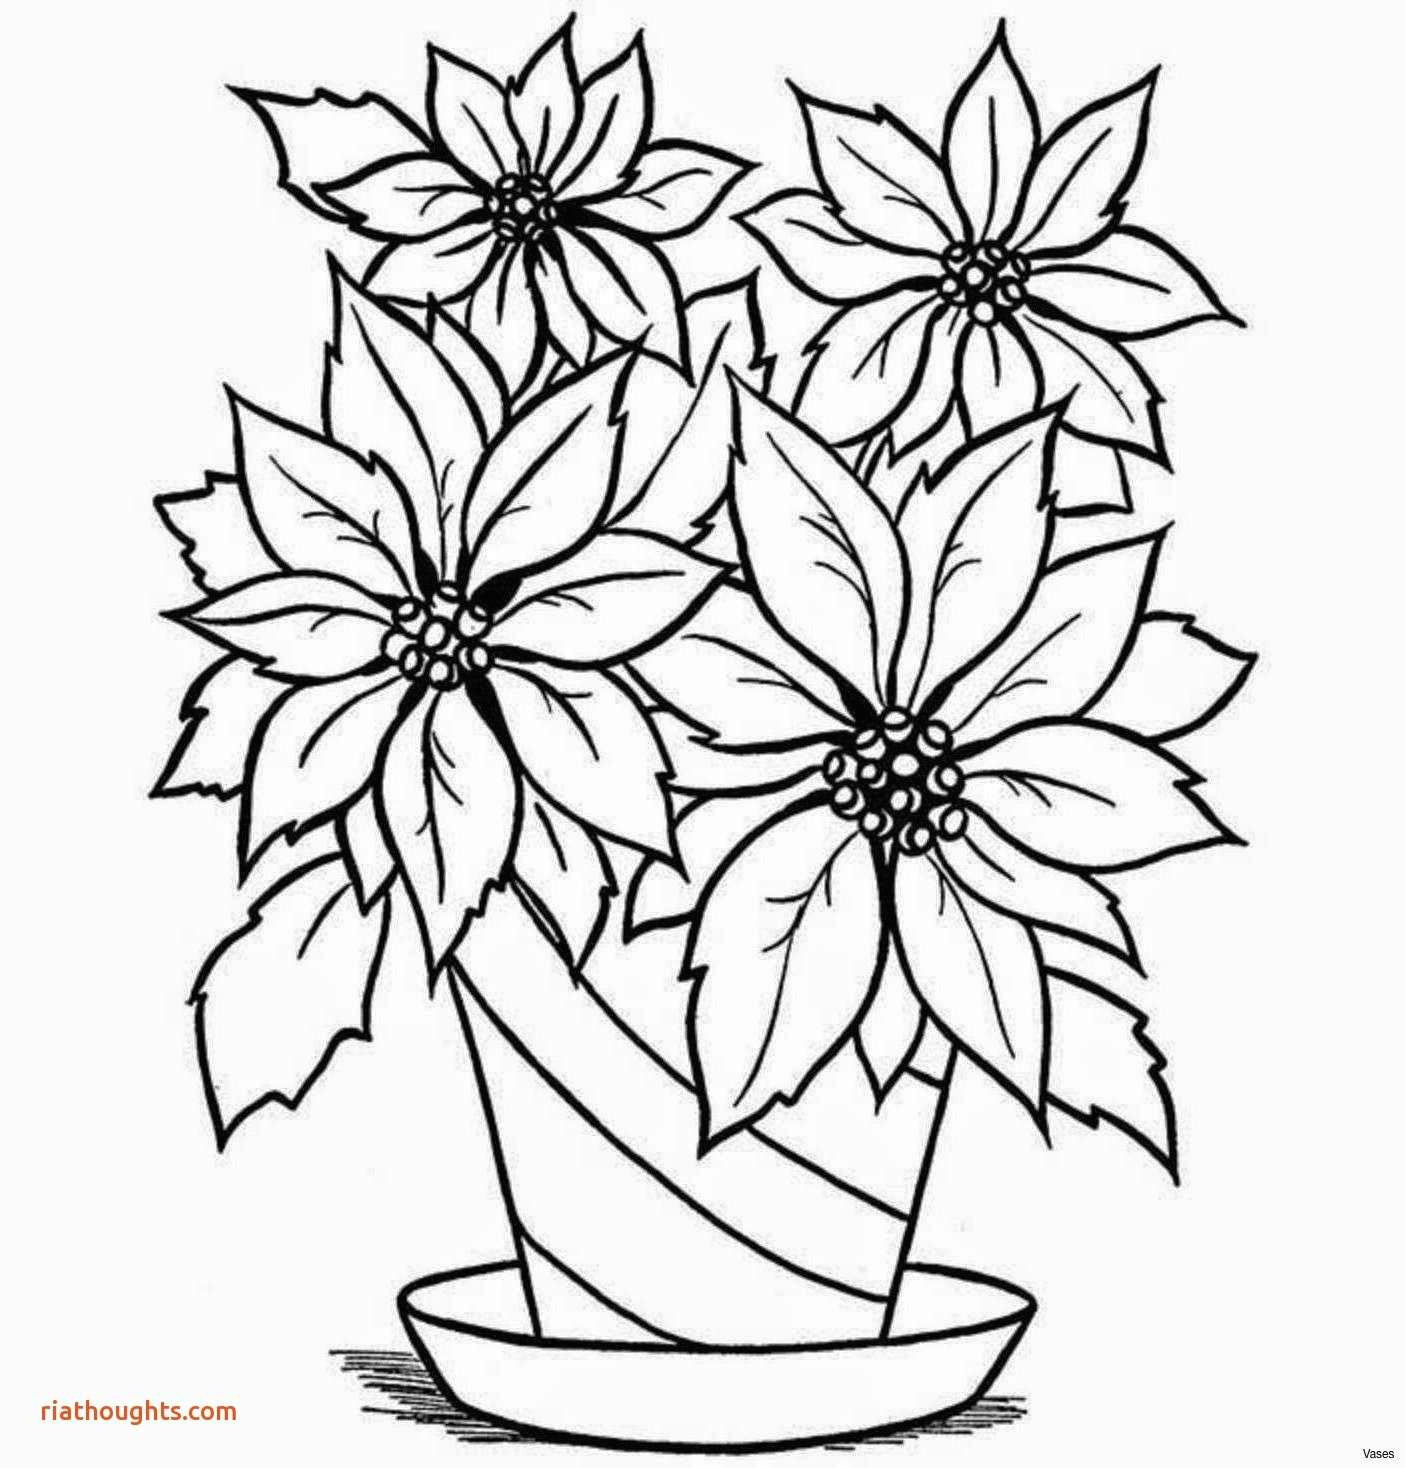 Drawing Images Of Flowers Step by Step 25 Fancy Draw A Flower Helpsite Us